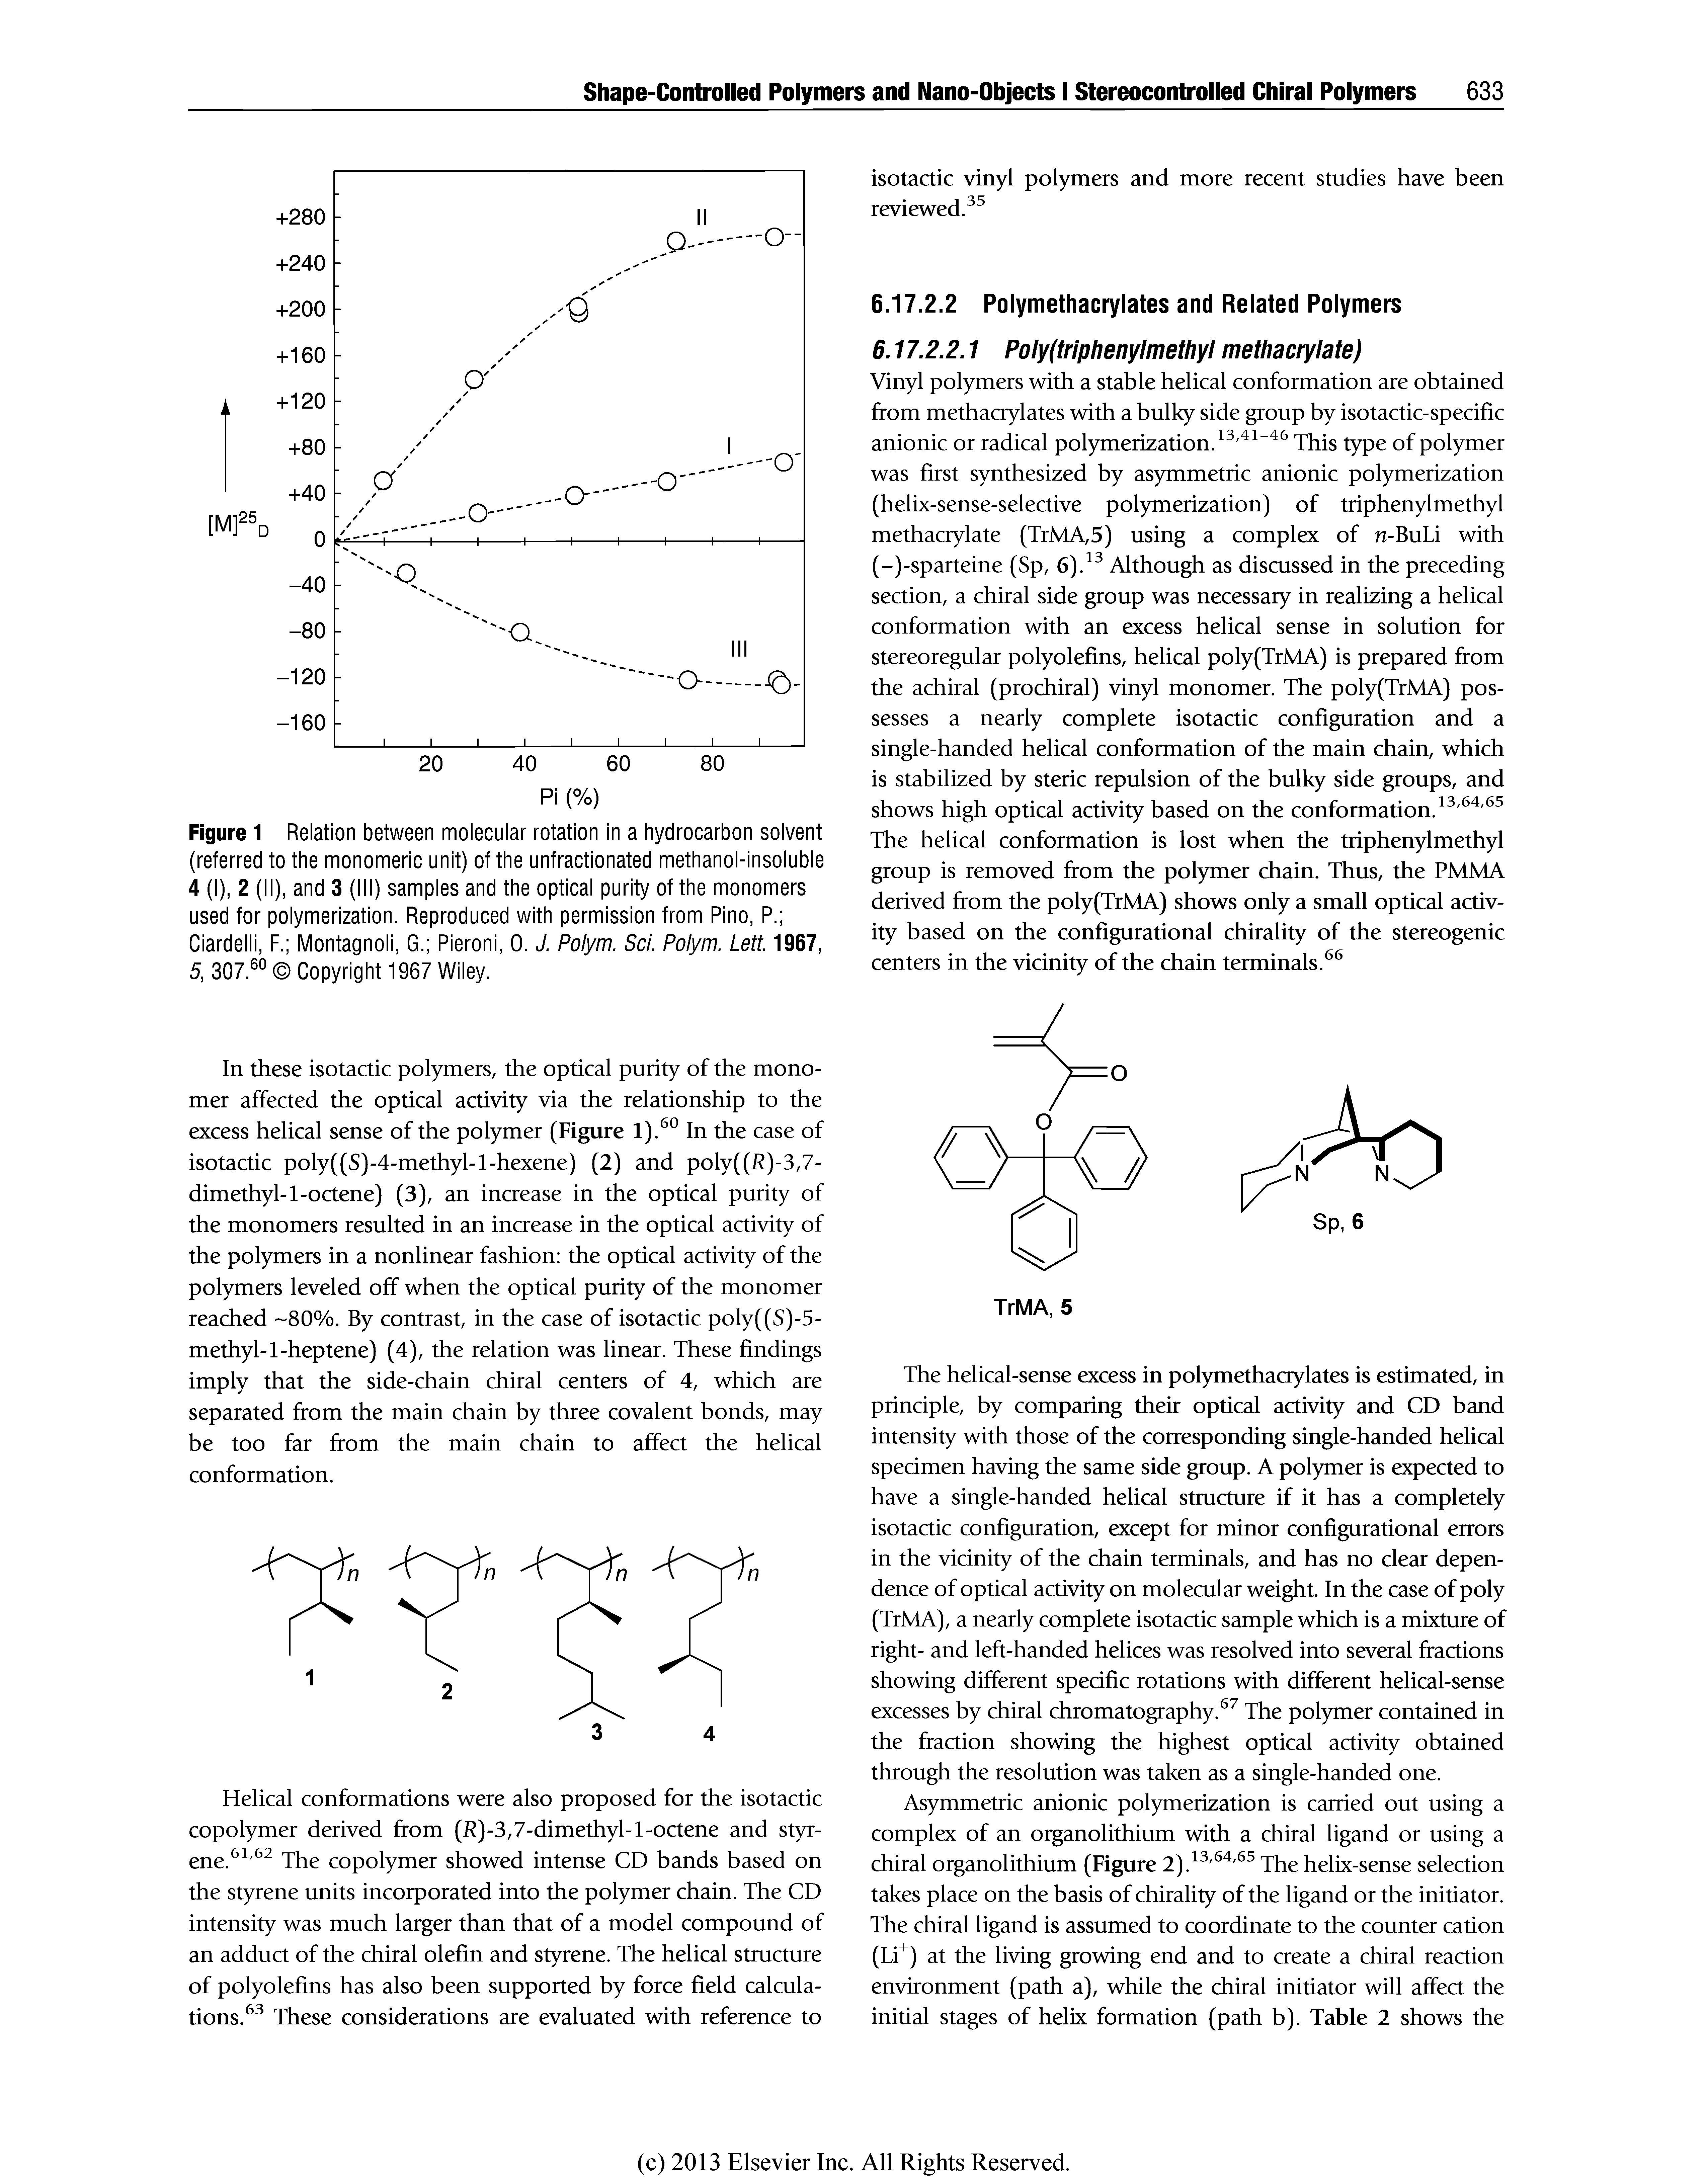 Figure 1 Relation between molecular rotation in a hydrocarbon solvent (referred to the monomeric unit) of the unfractionated methanol-insoluble 4 (I), 2 (II), and 3 (III) samples and the optical purity of the monomers used for polymerization. Reproduced with permission from Pino, P. Ciardelli, F. Montagnoli, G. Pieroni, 0. J. Polym. Sci. Polym. Lett. 1967, 5, 307 Copyright 1967 Wiley.